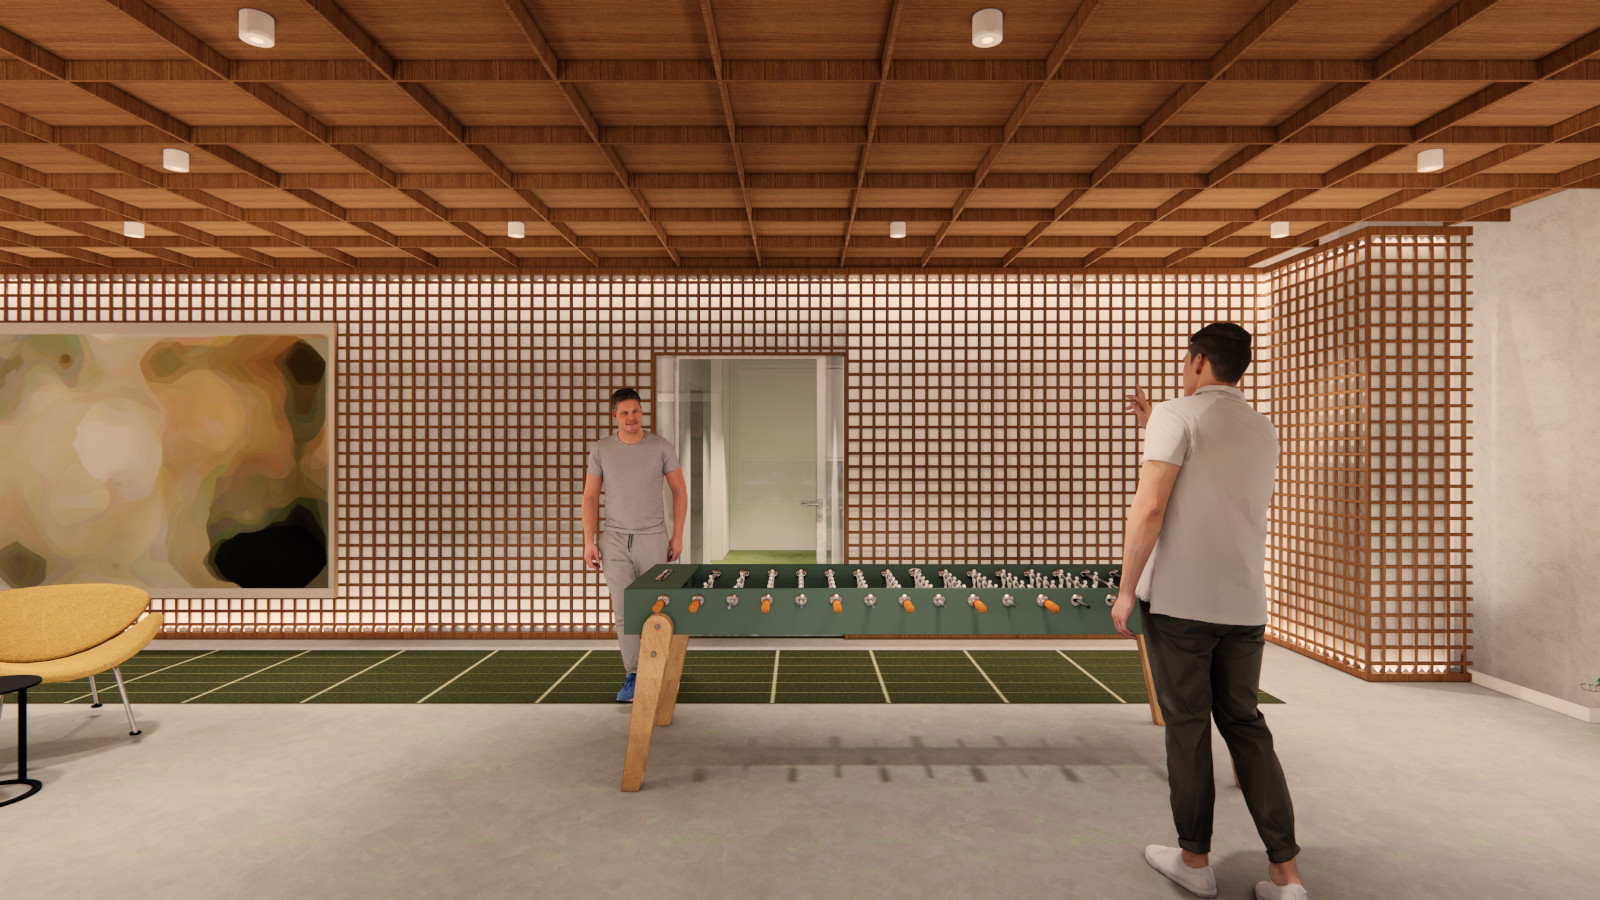 Architecture Concept: Extra Long Foosball Table